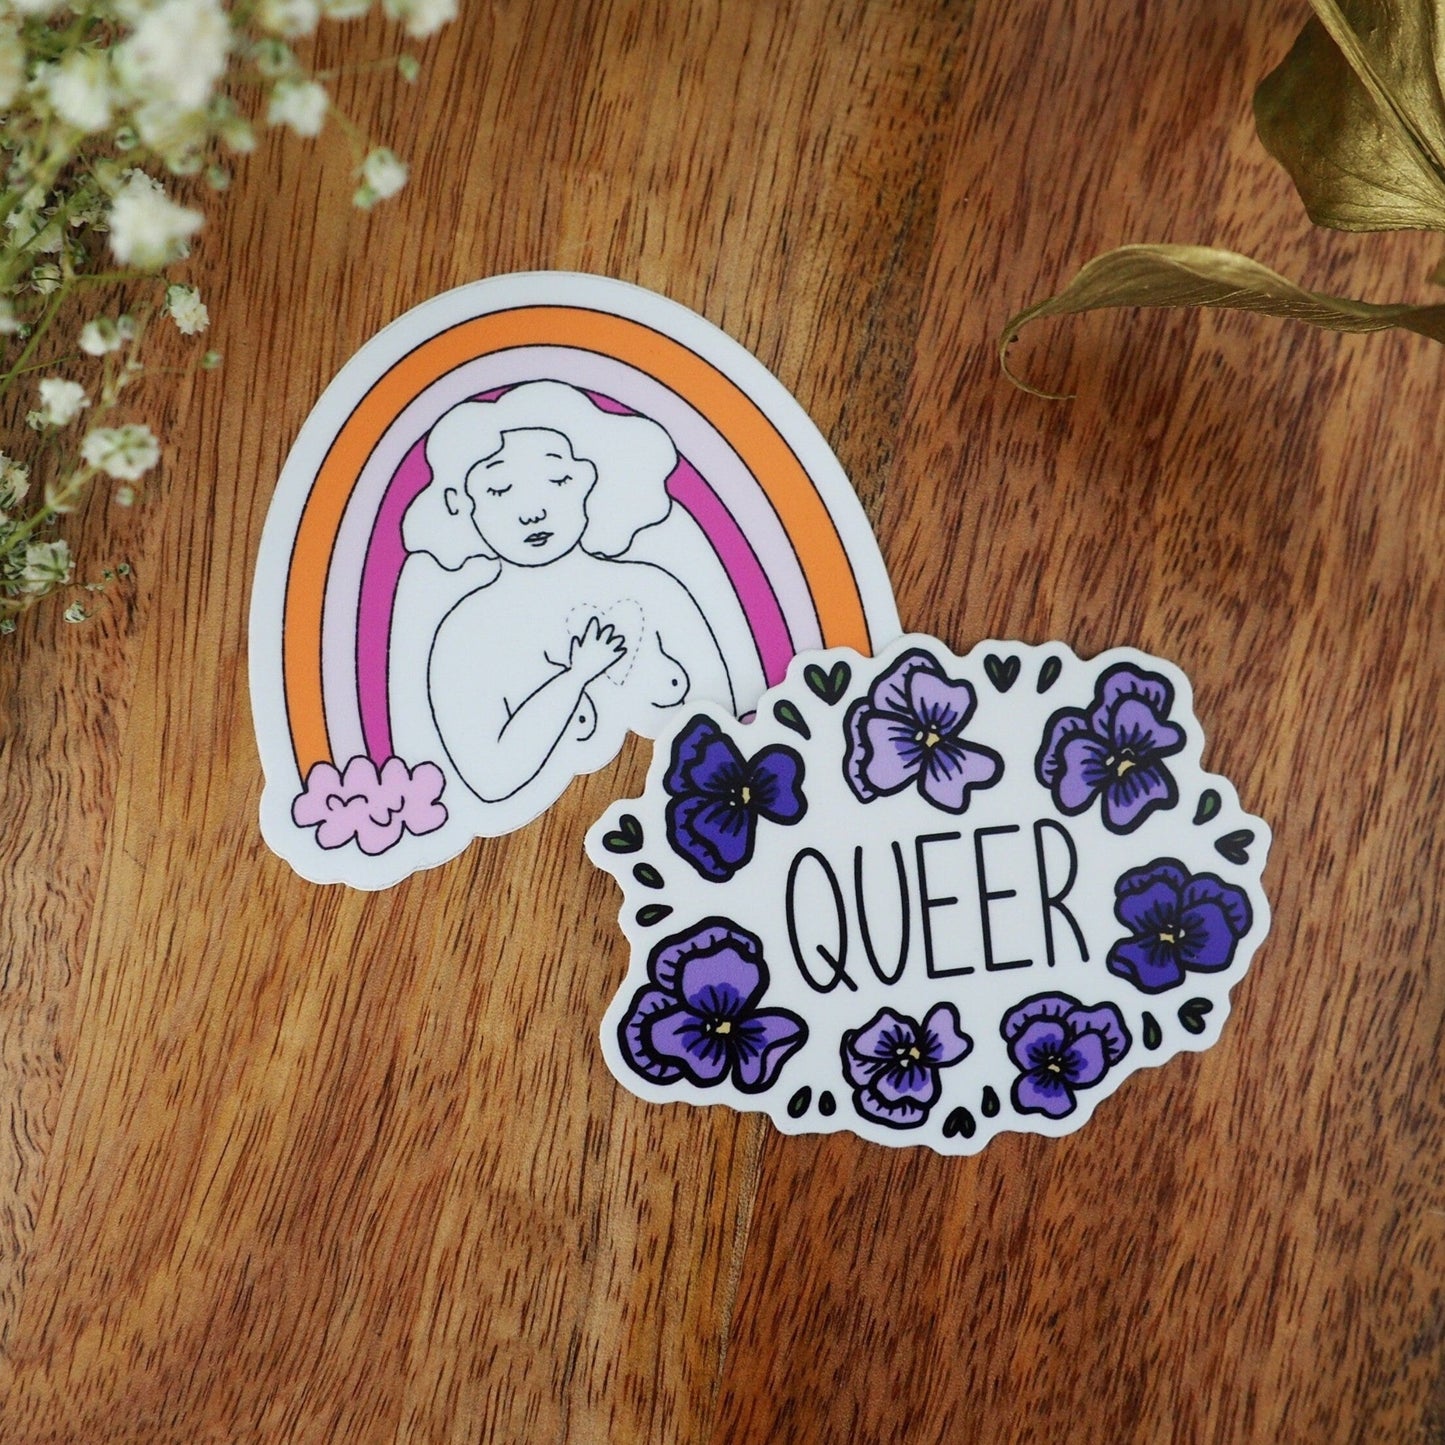 Queer Pansy/Violet Sticker